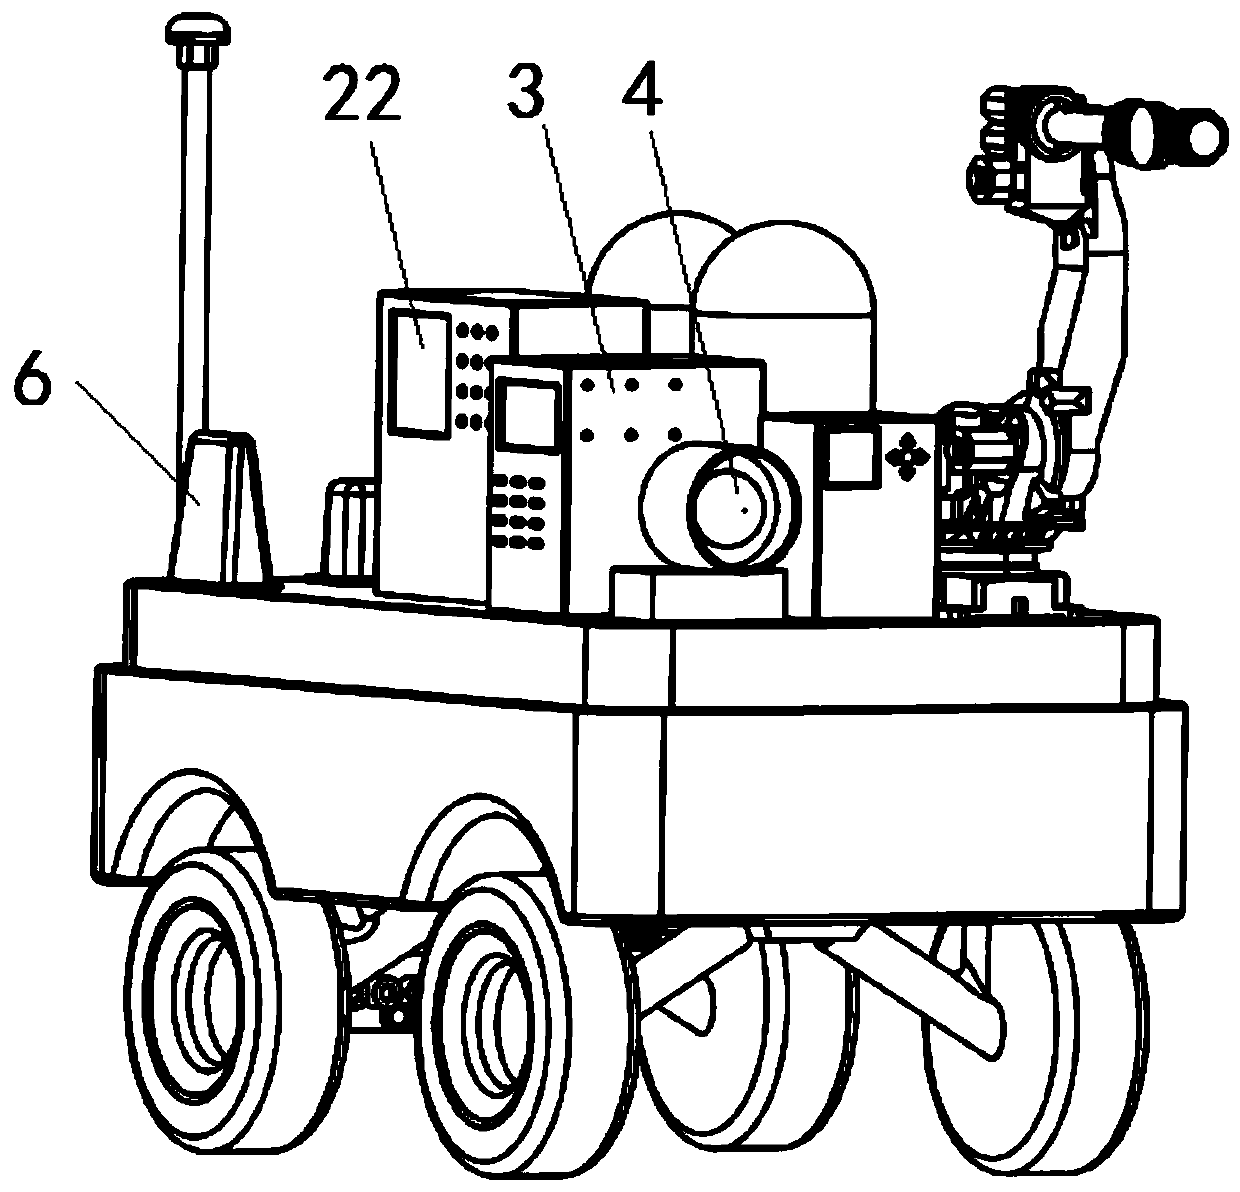 Integrated cleaning inspection vehicle for navigation assistance lamps